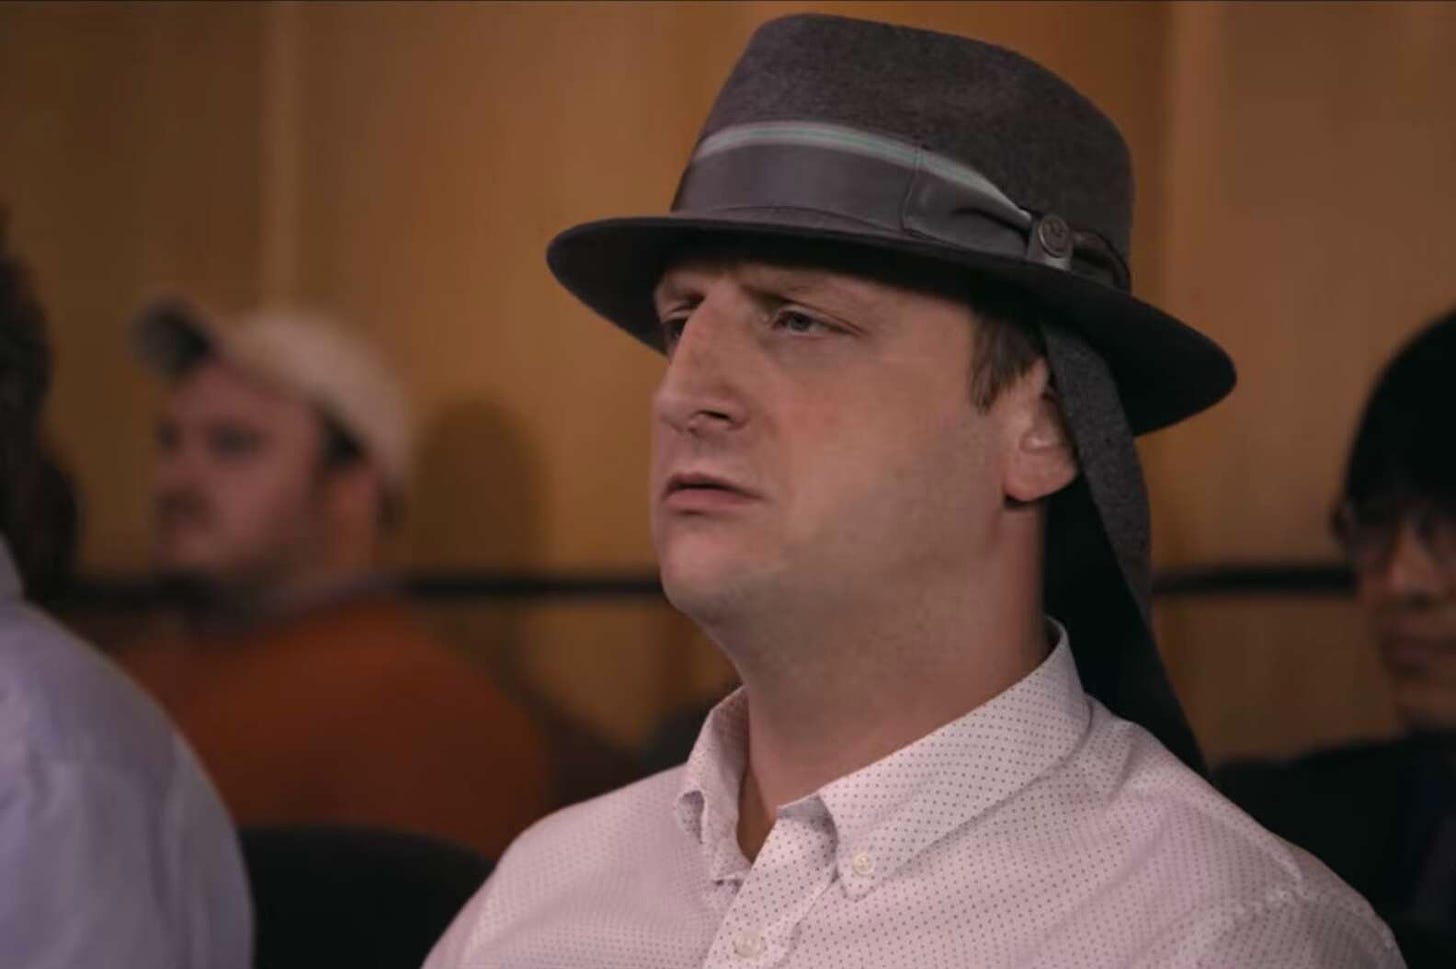 Tim Robinson wearing a very stupid hat with a flap on the back from I Think You Should Leave.